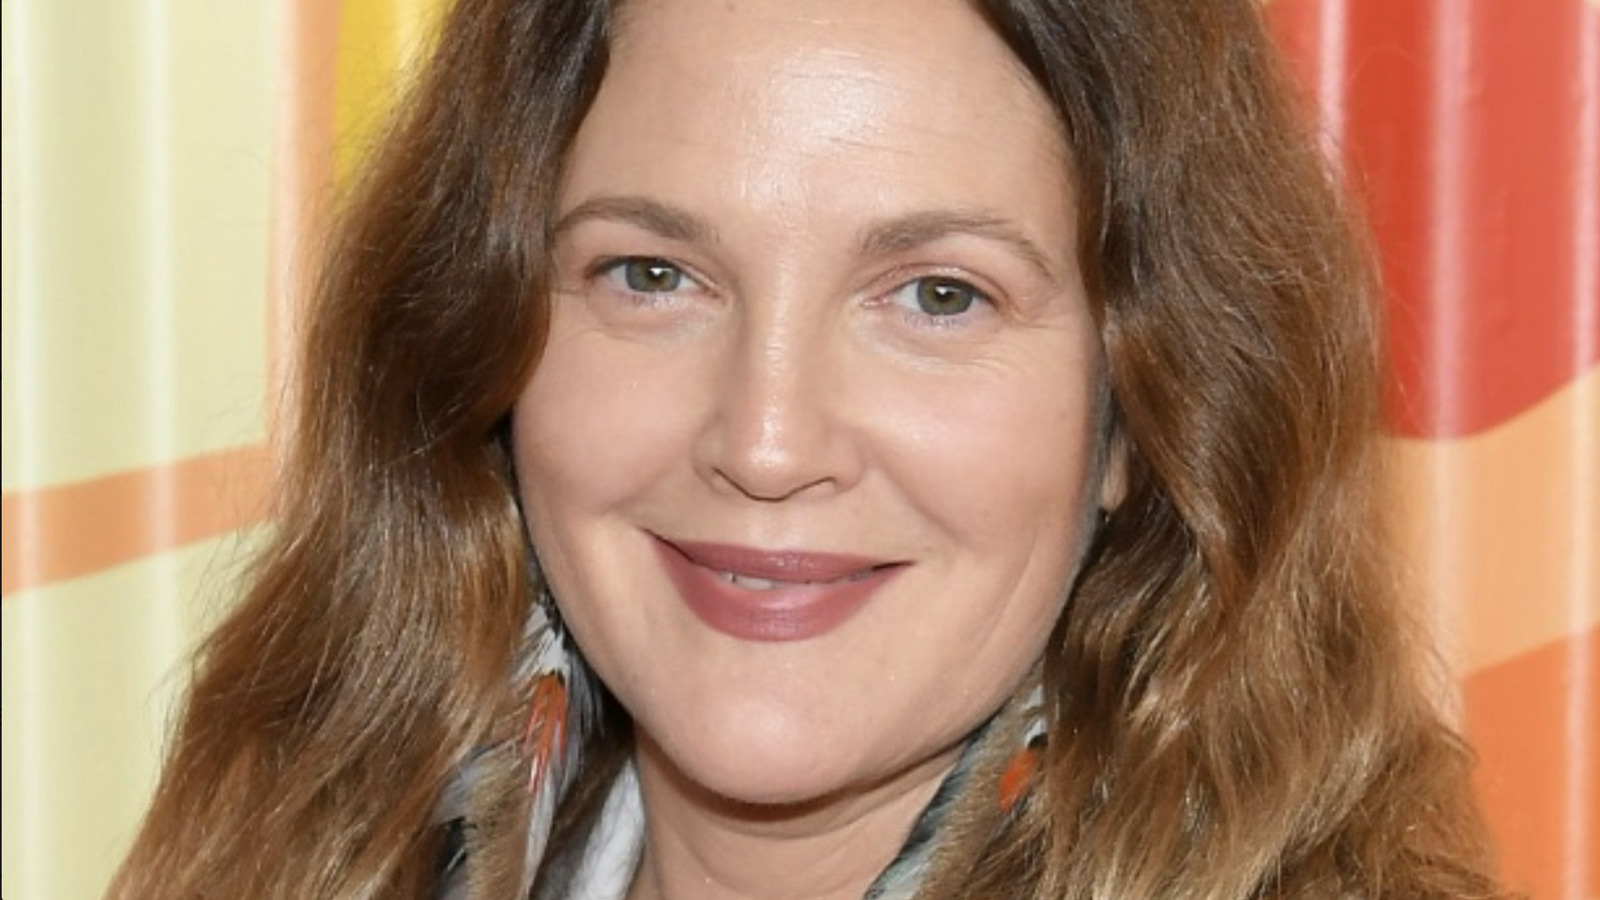 Drew Barrymore's Heart-Shaped Dutch Oven Is Almost Too Cute To